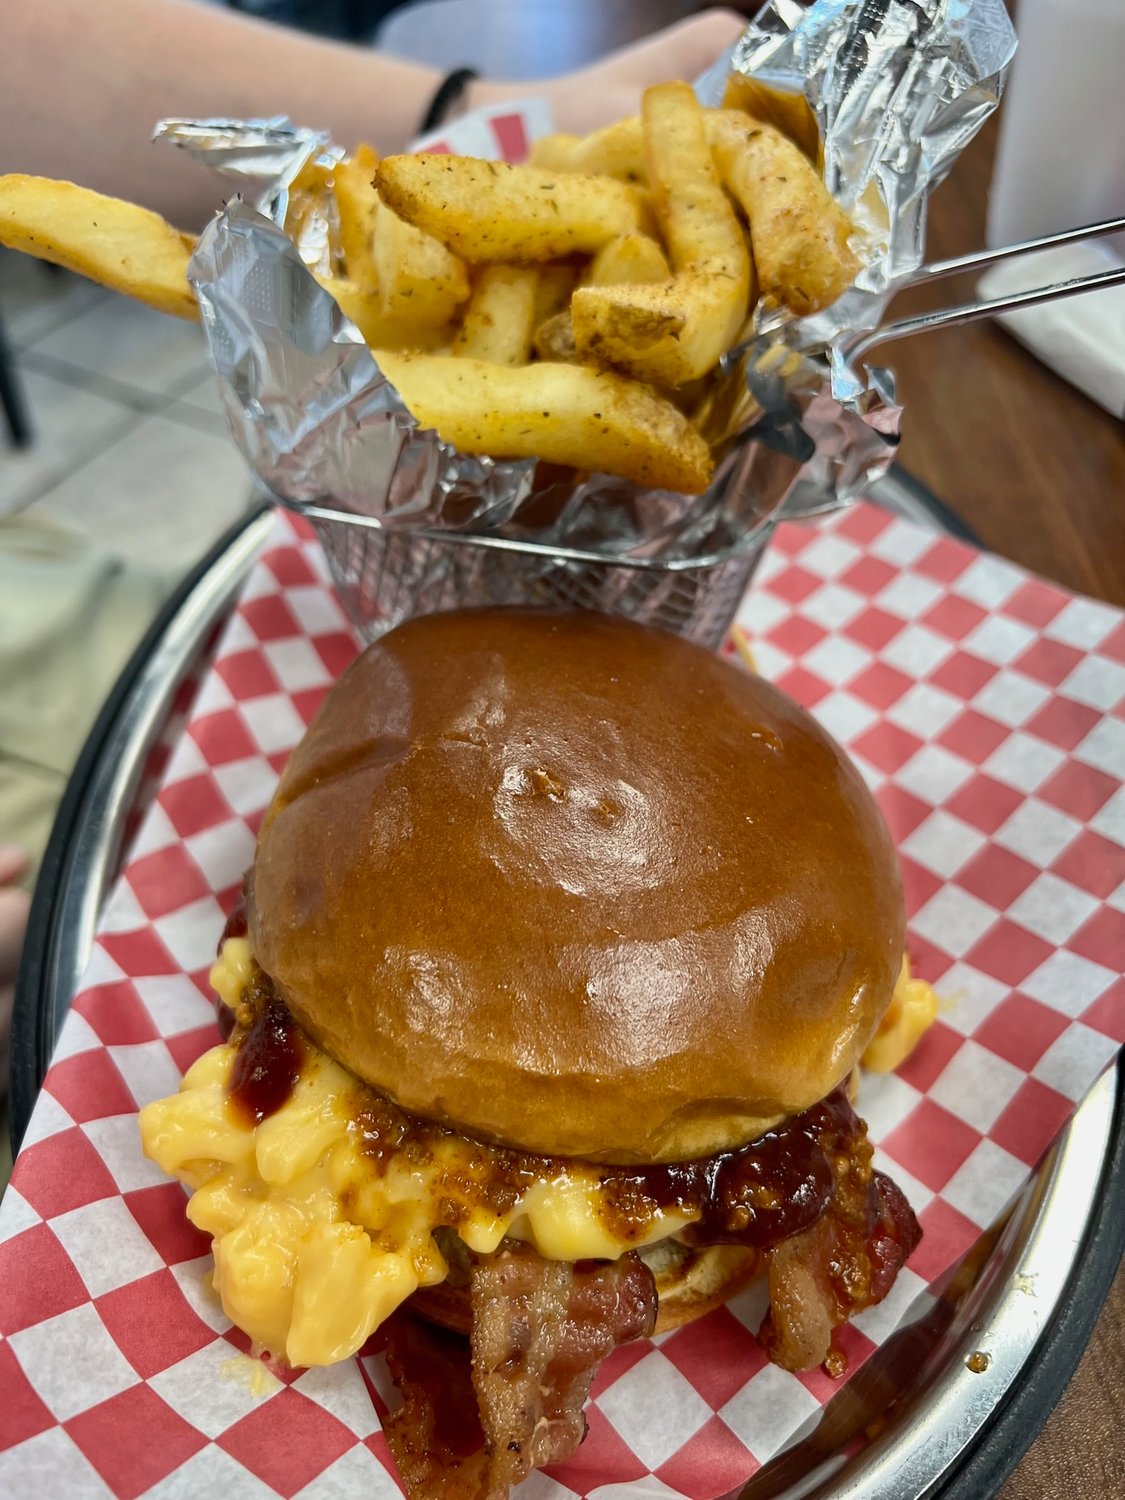 Creative burgers include one that’s stuffed with bacon, chili, mac and cheese and barbecue sauce, at Fry Daddys.